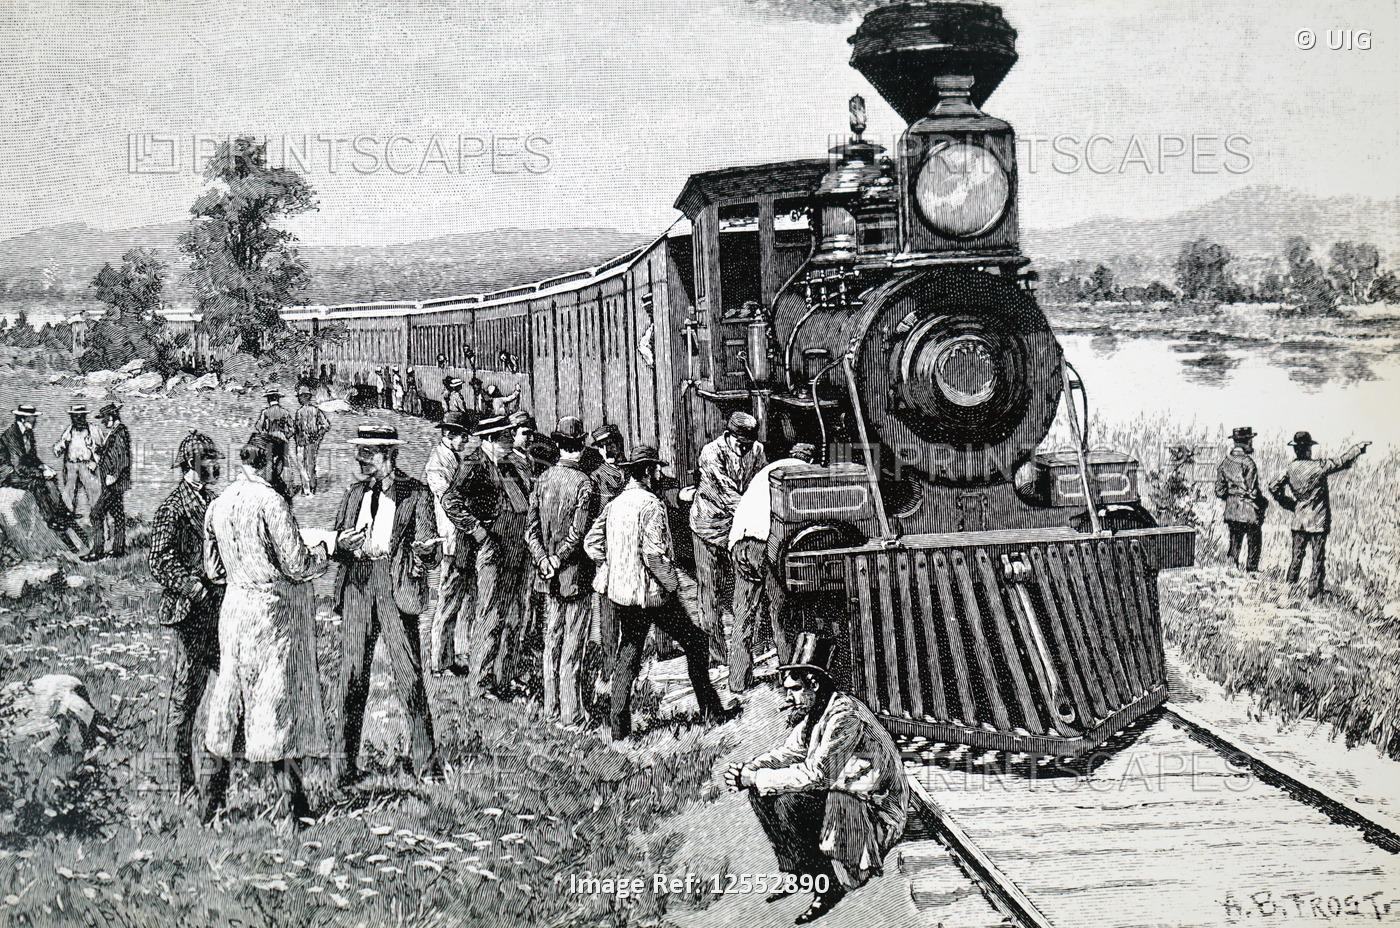 Illustration depicting a steam train which has broken down, 19th century